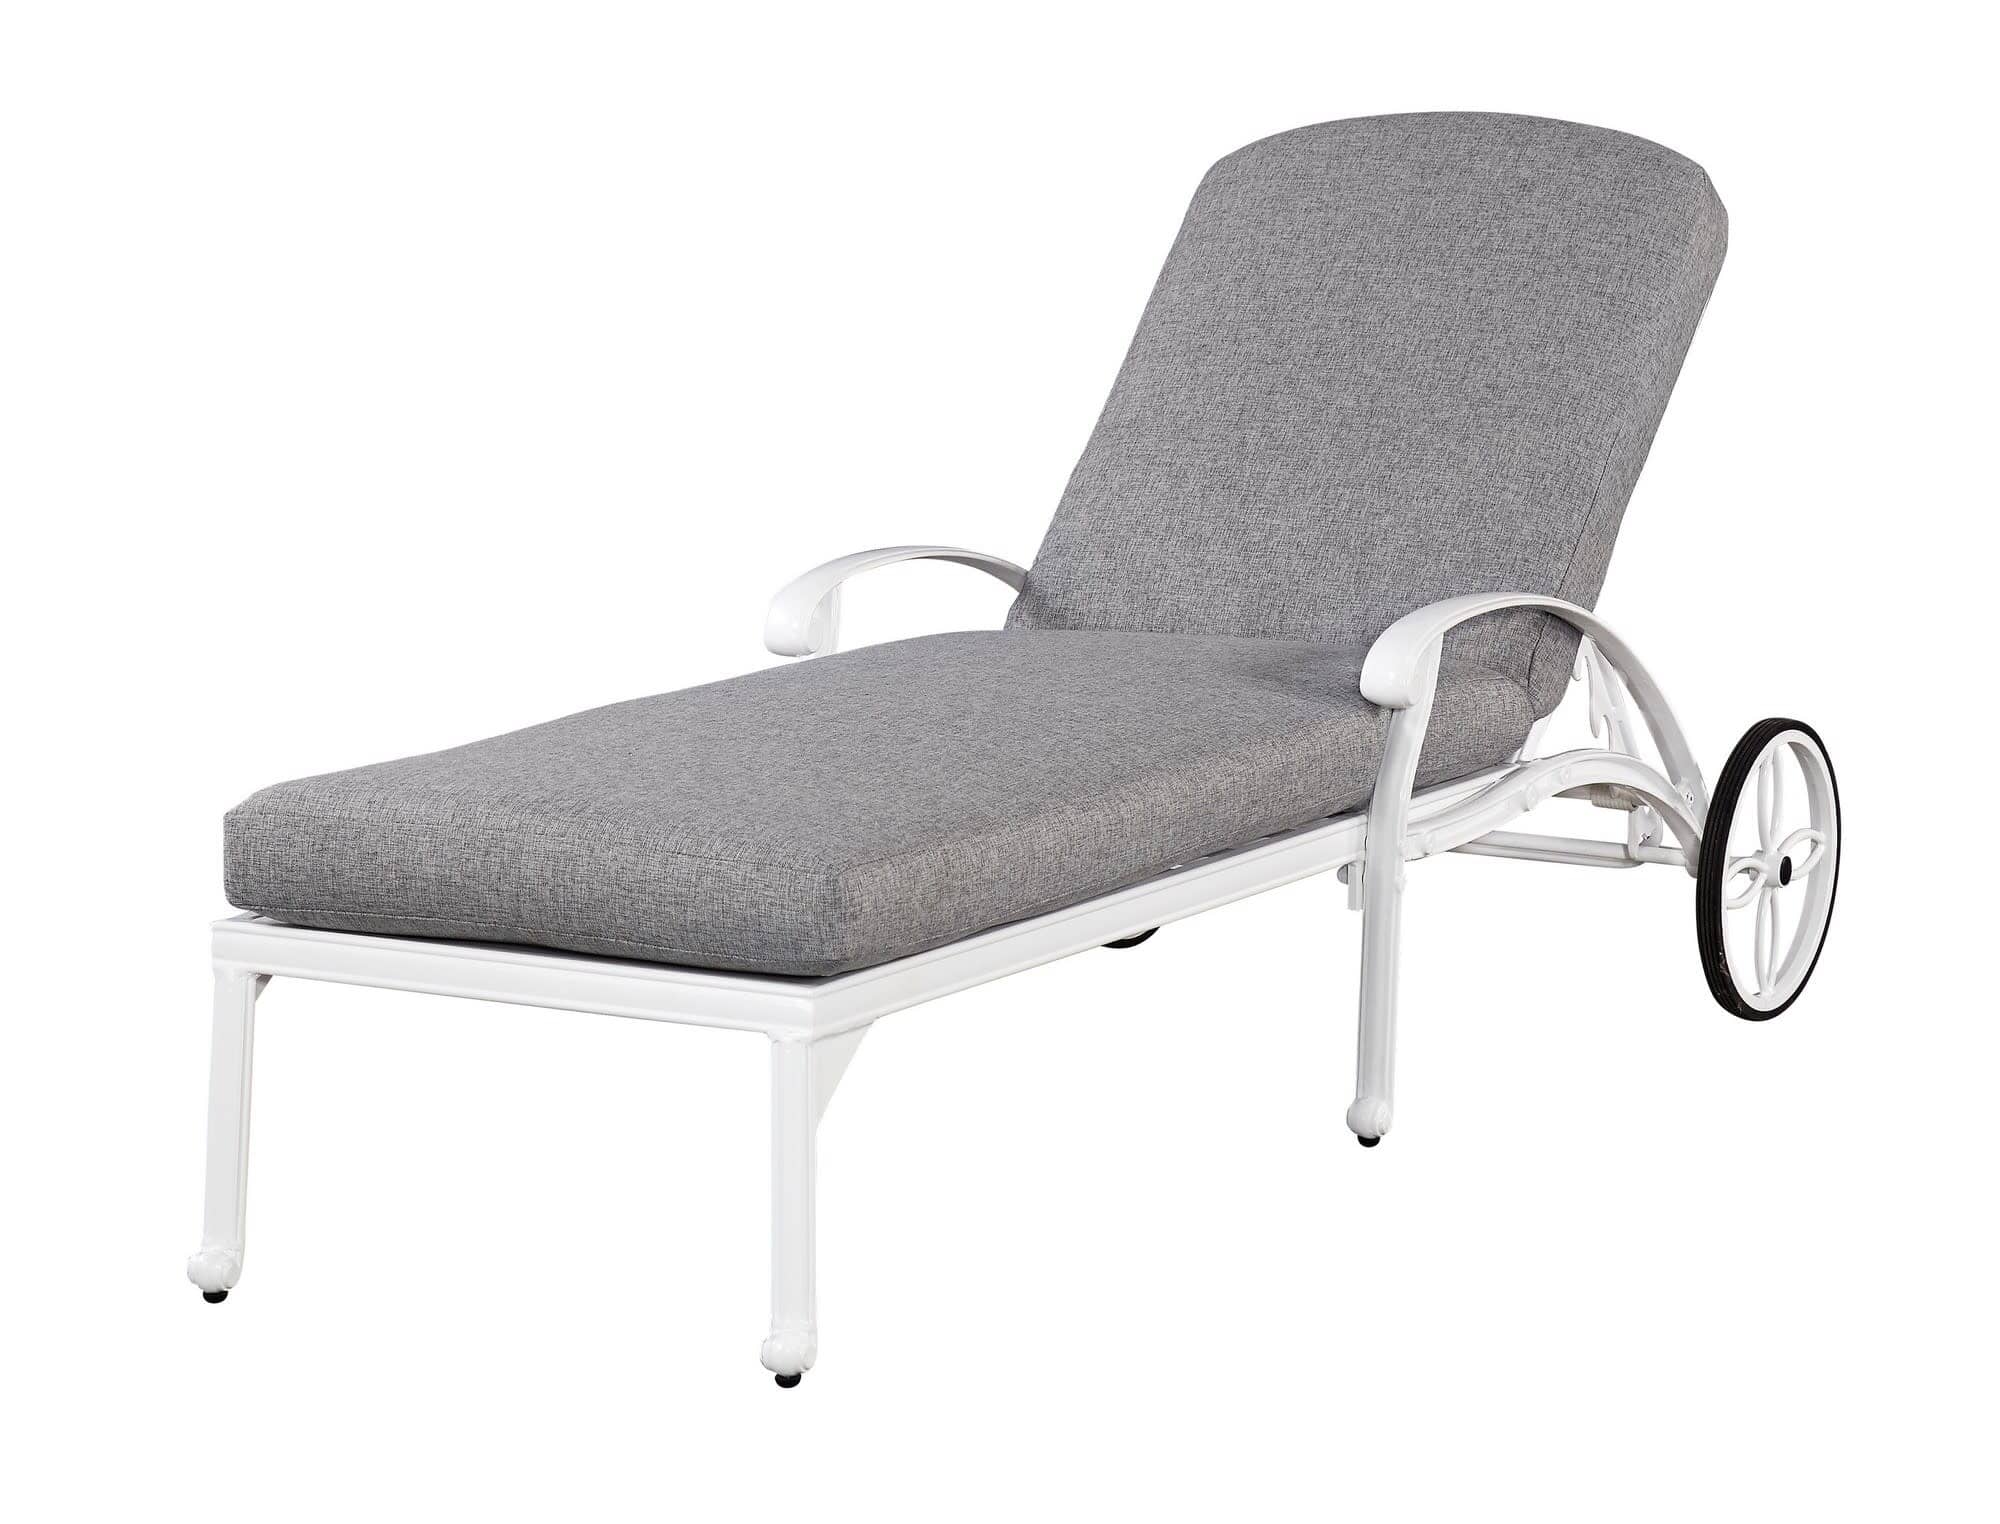 Coastal Outdoor Chaise Lounge By Capri Outdoor Chaise Capri